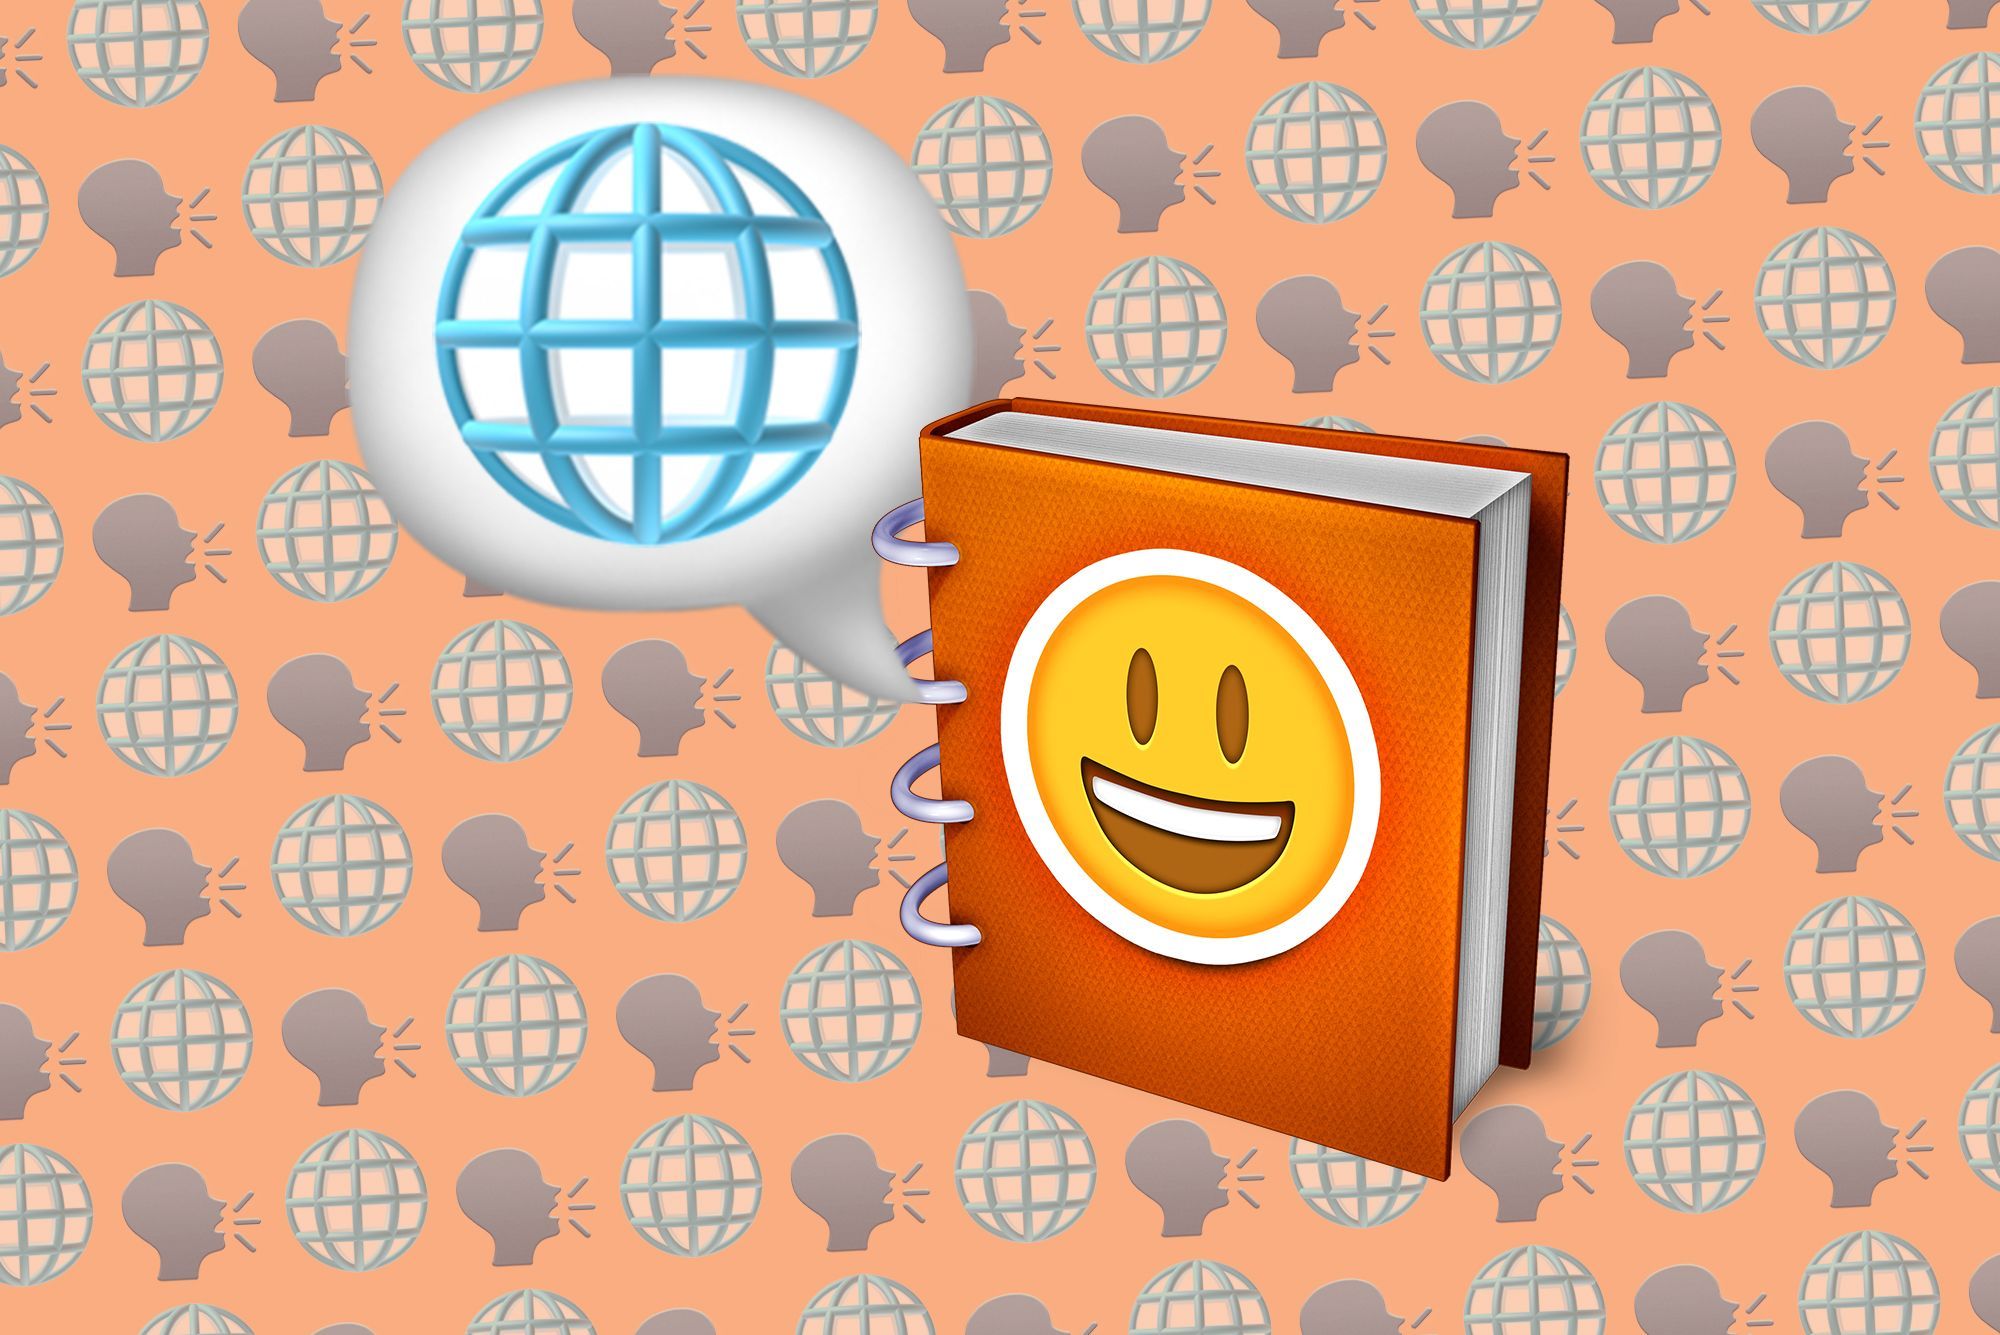 13 More Languages Supported on Emojipedia